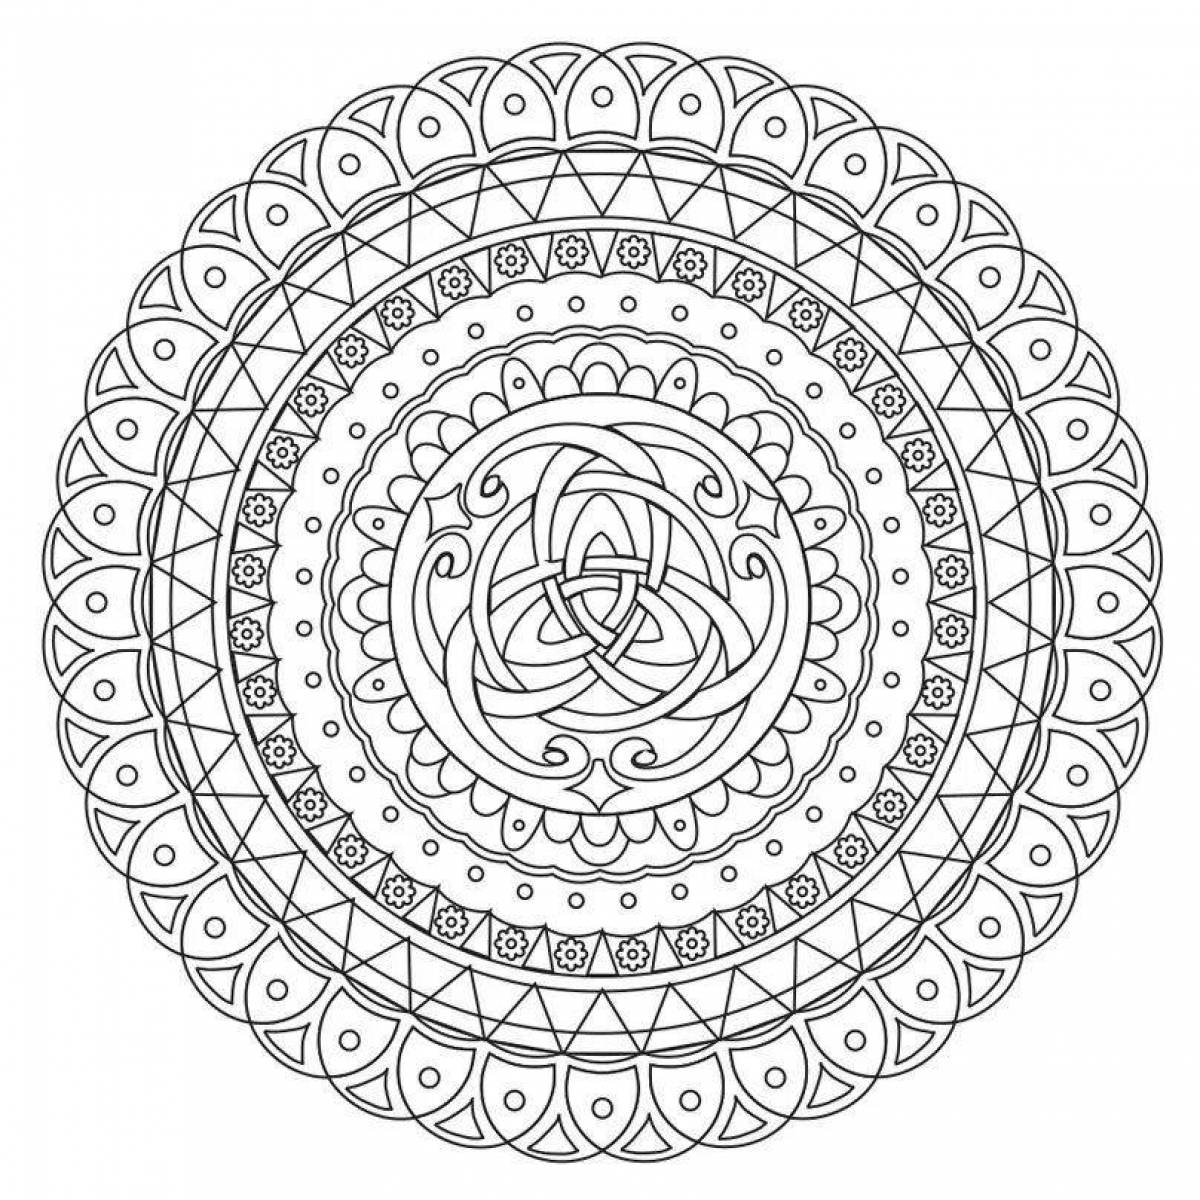 Playful mantra coloring pages